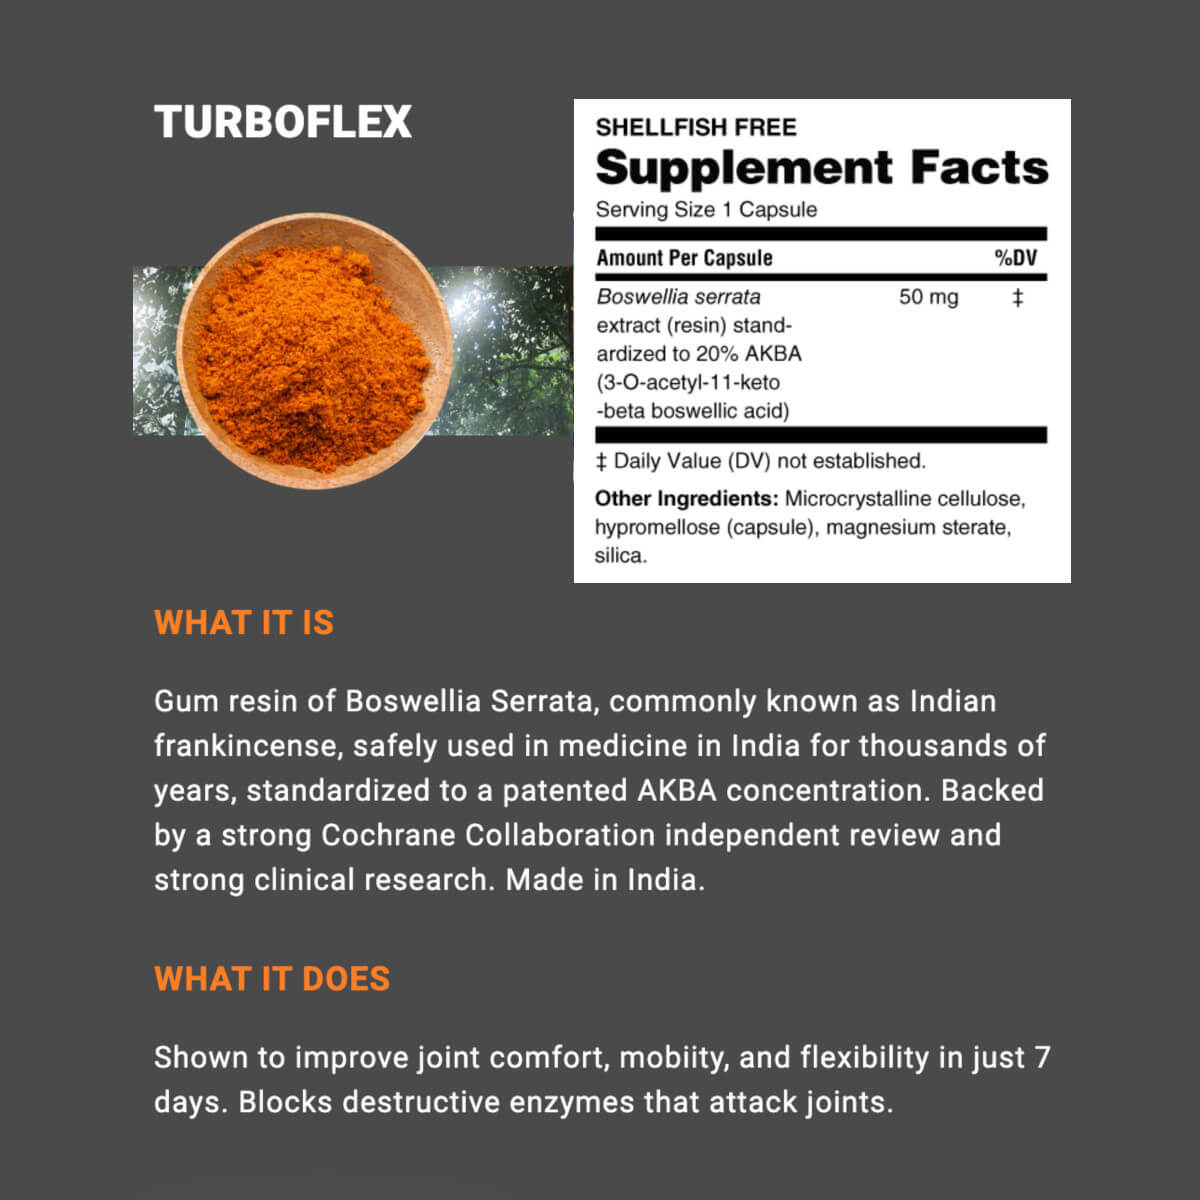 Supple TurboFlex supplement facts and ingredient facts. Tip: Strong muscles help knee pain.